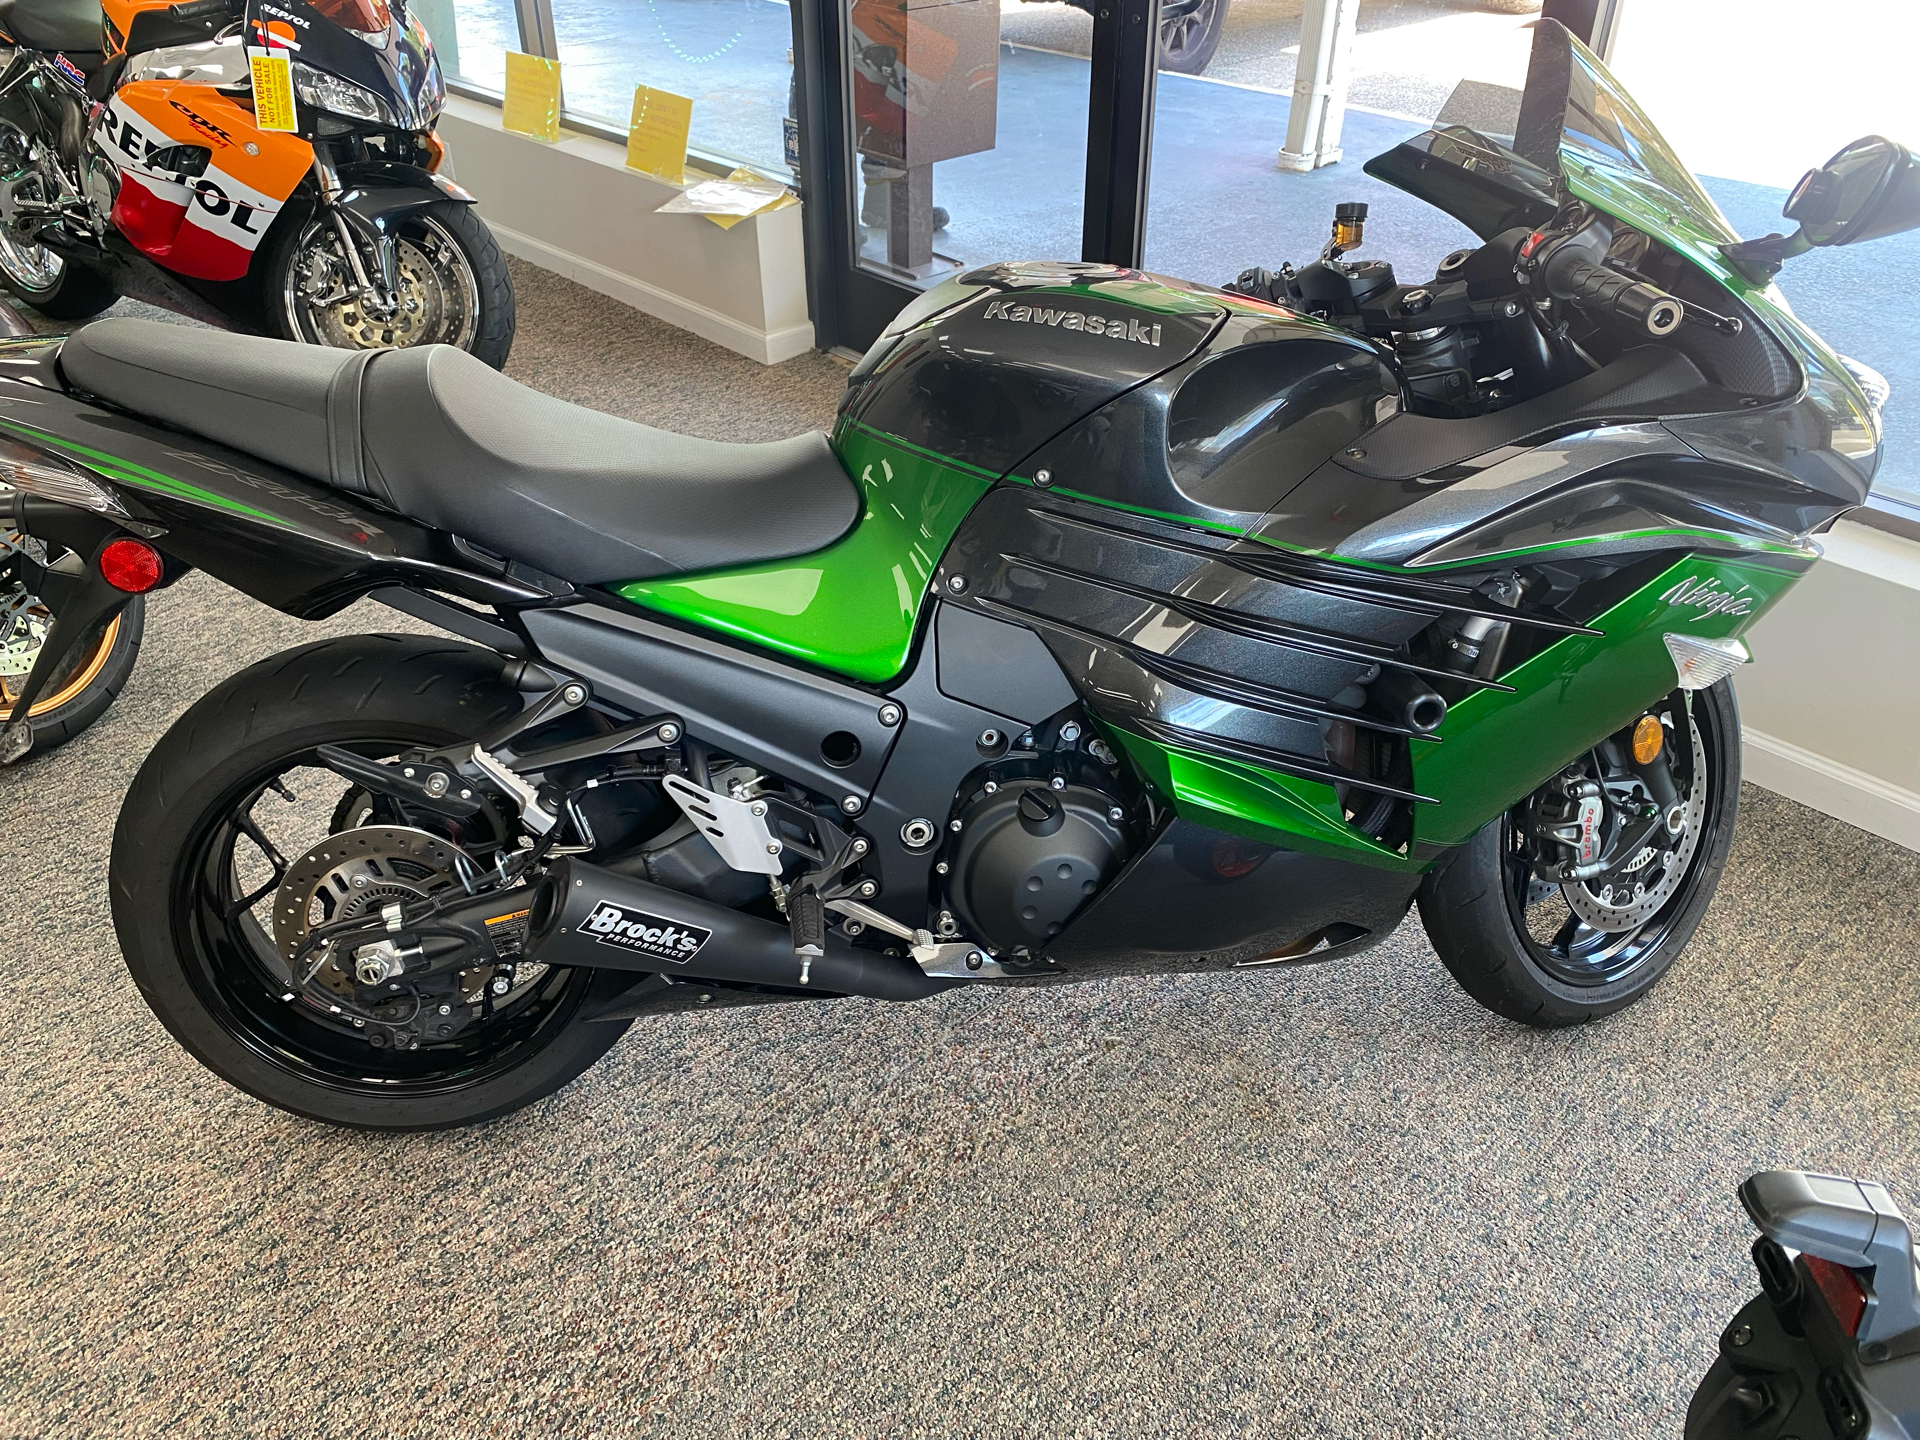 Certified Pre-Owned 2018 Kawasaki Ninja ZX-14R ABS SE Motorcycles in Cary,  NC | Stock Number: N/A